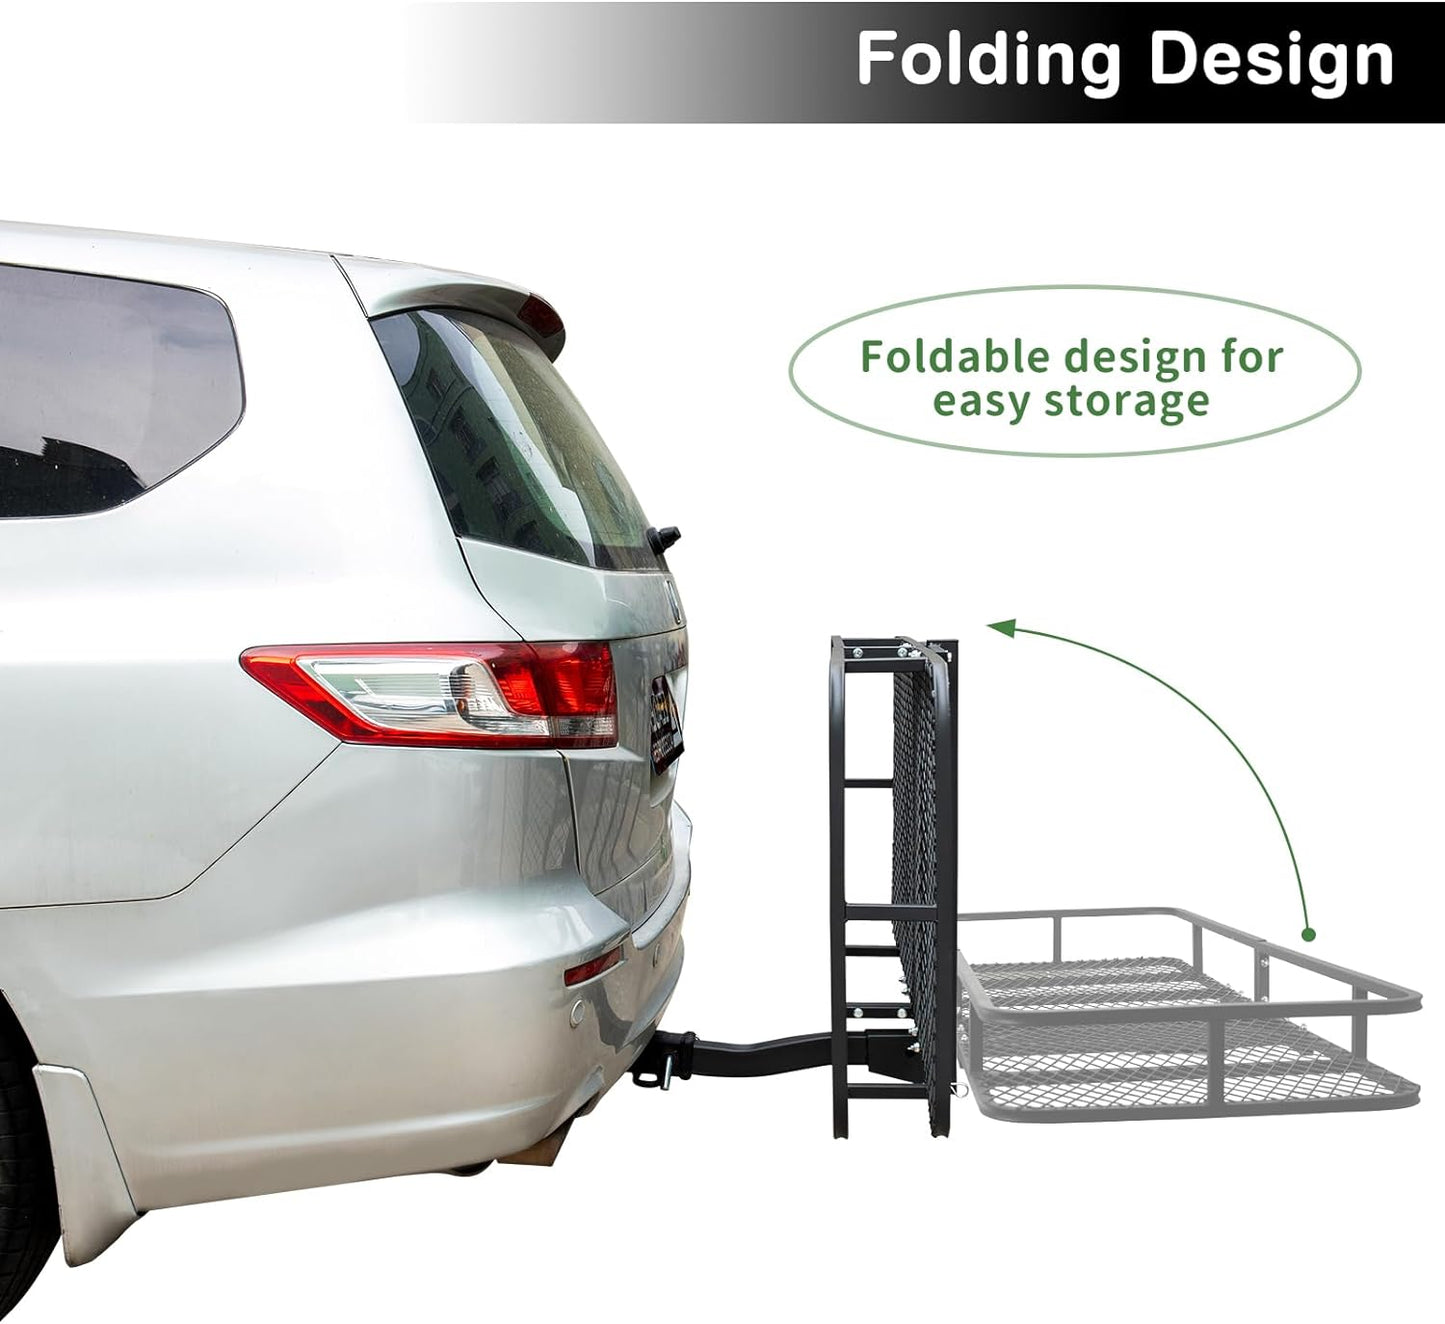 Trailer Hitch Cargo Carrier Rack, 60"x24"x6" Folding Cargo Carrier Hitch Mount, Vehicle Cargo Basket for SUV, RV, Truck, Van, Fits 2" Receiver 500 lbs Load Capacity